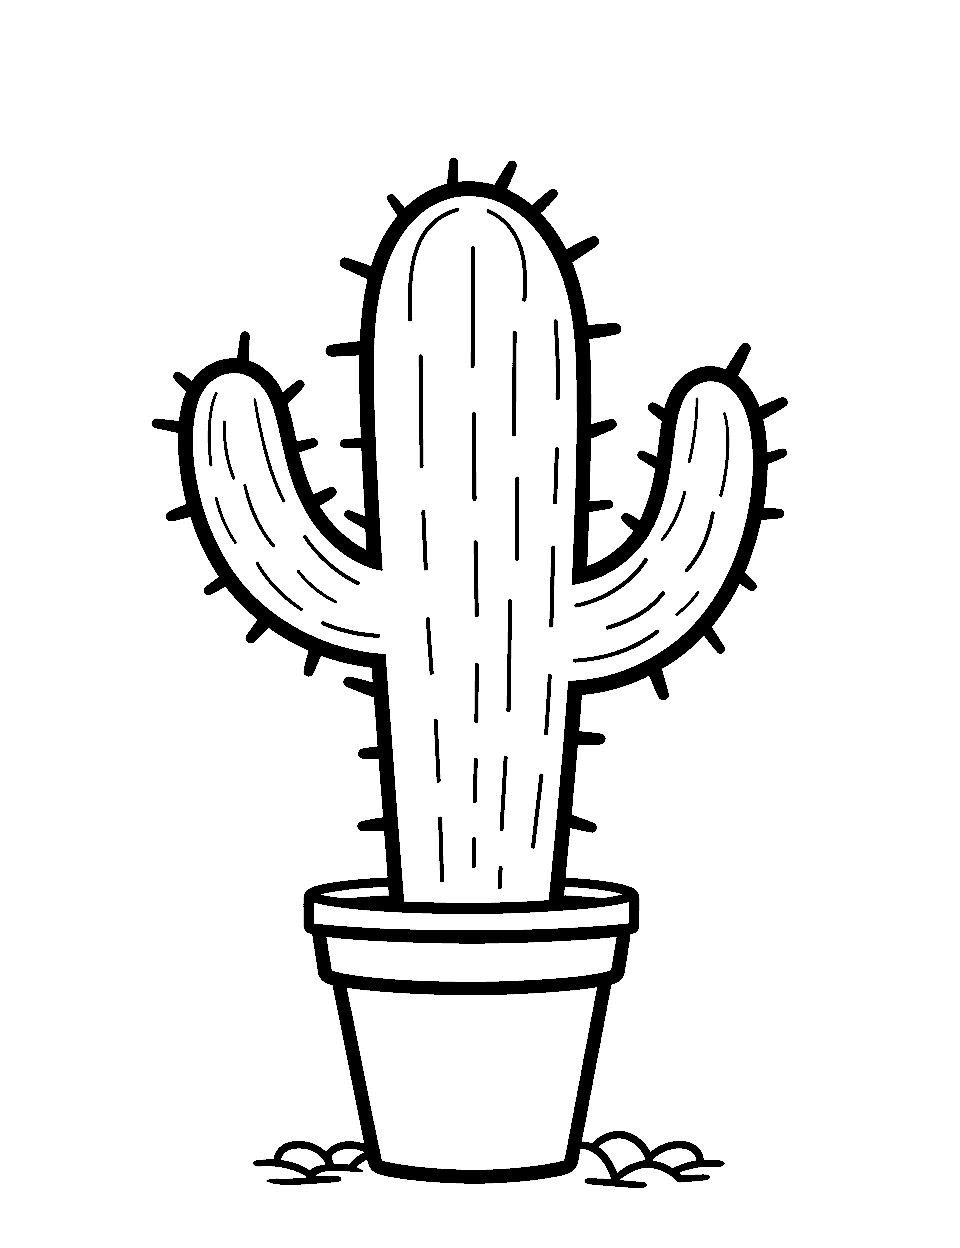 Easy Cactus Outline Coloring Page - A simple, easy-to-color outline of a basic cactus shape, suitable for younger kids.